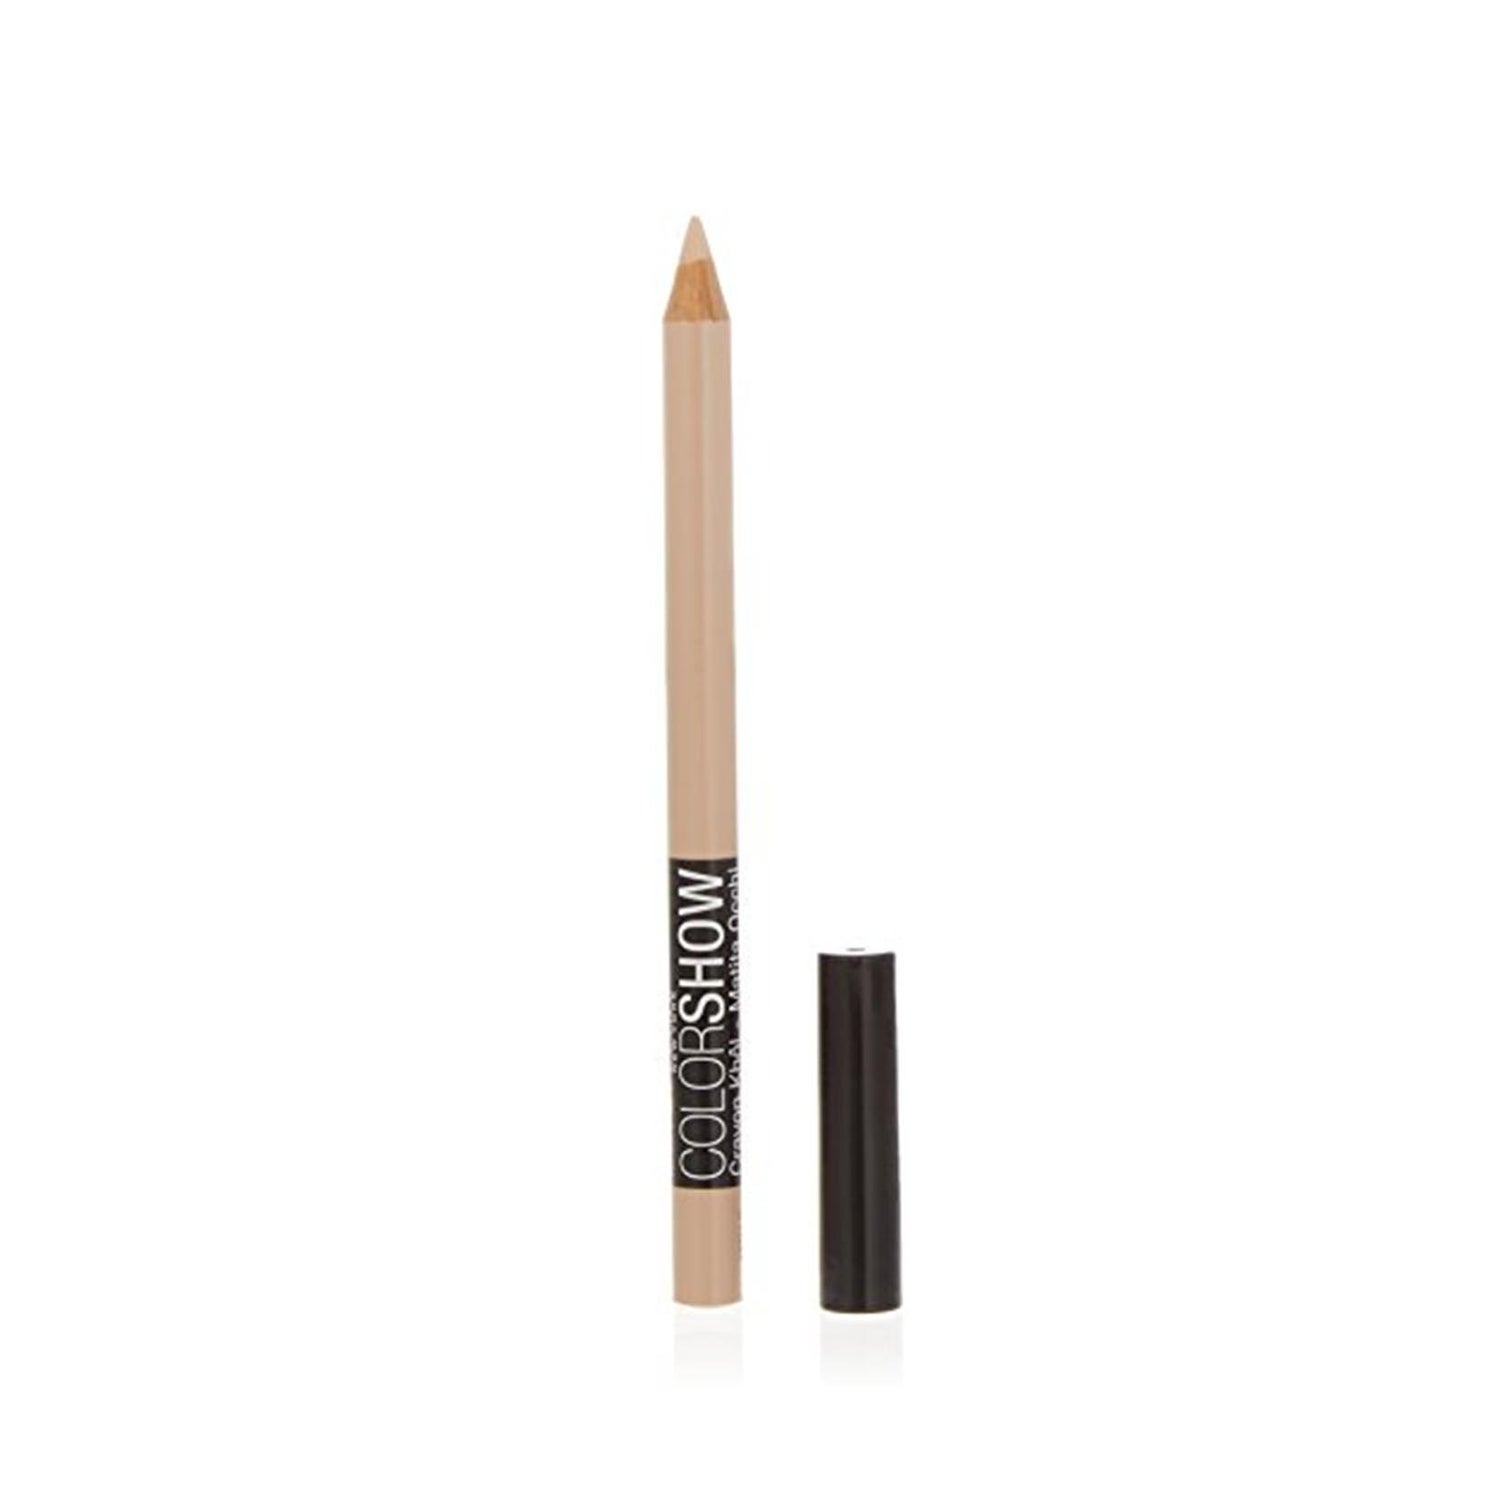 Maybelline Colorshow Khol 420 Barely Beige 1pc